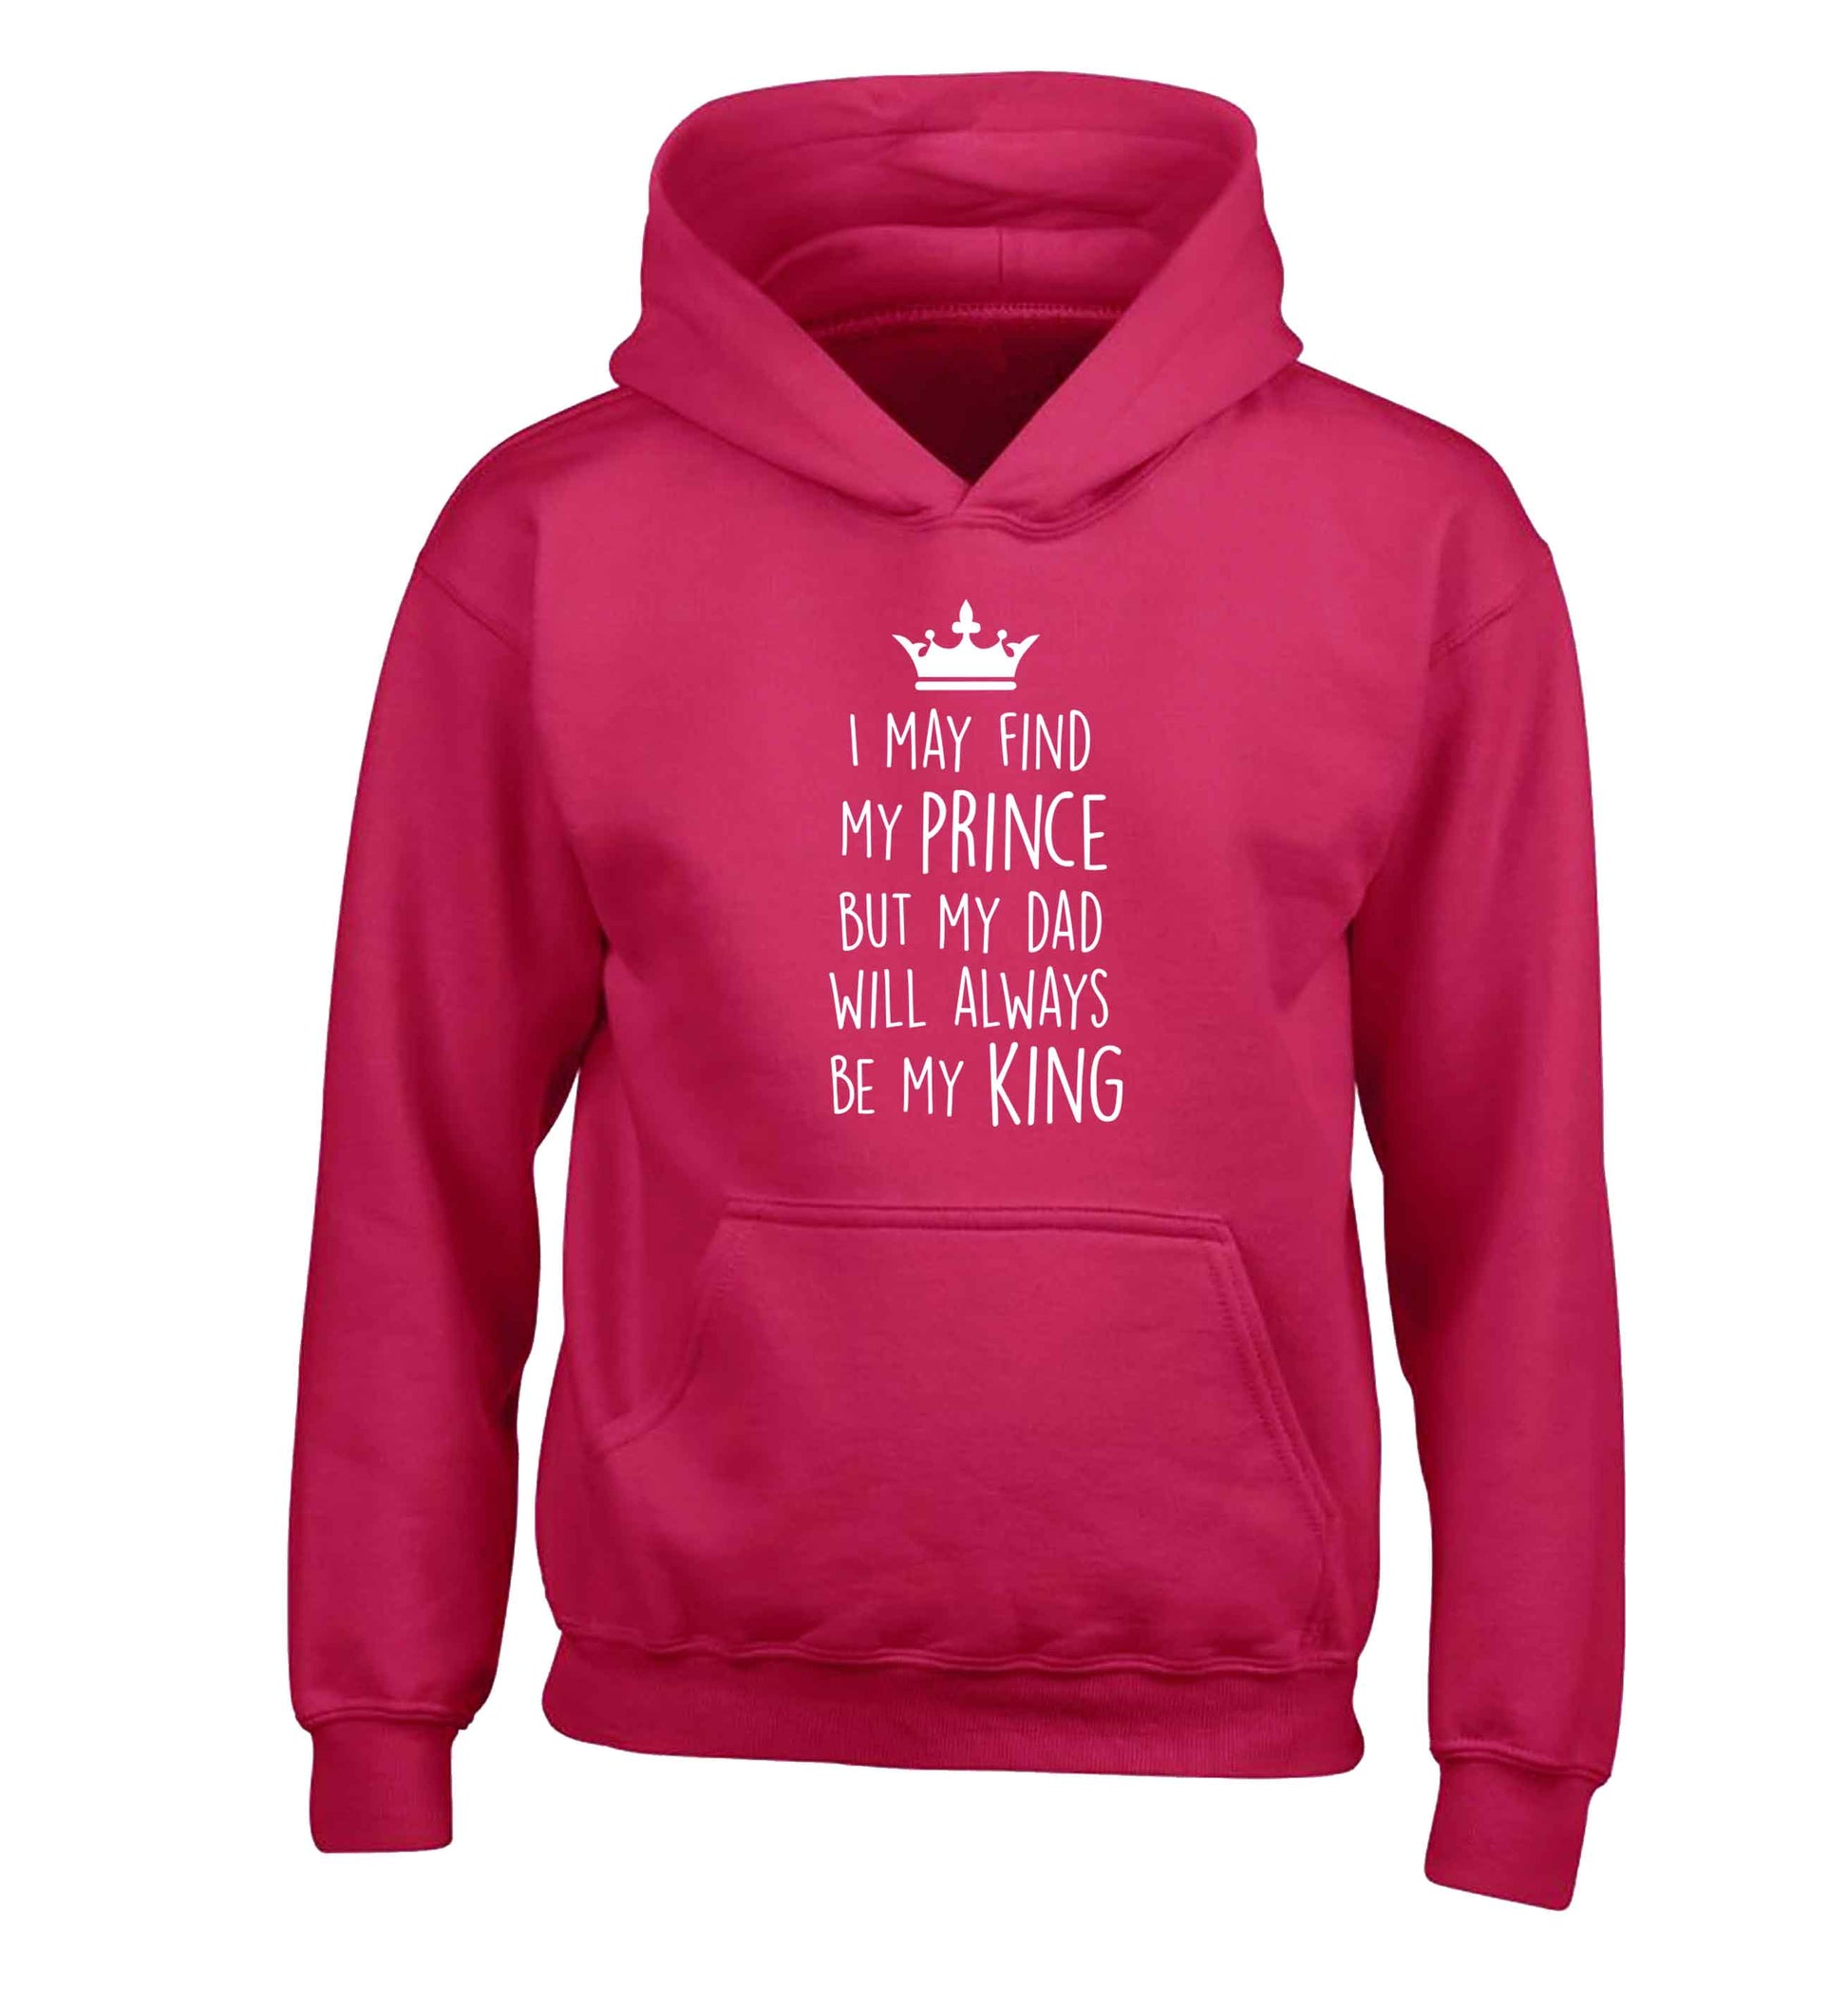 I may find my prince but my dad will always be my king children's pink hoodie 12-13 Years